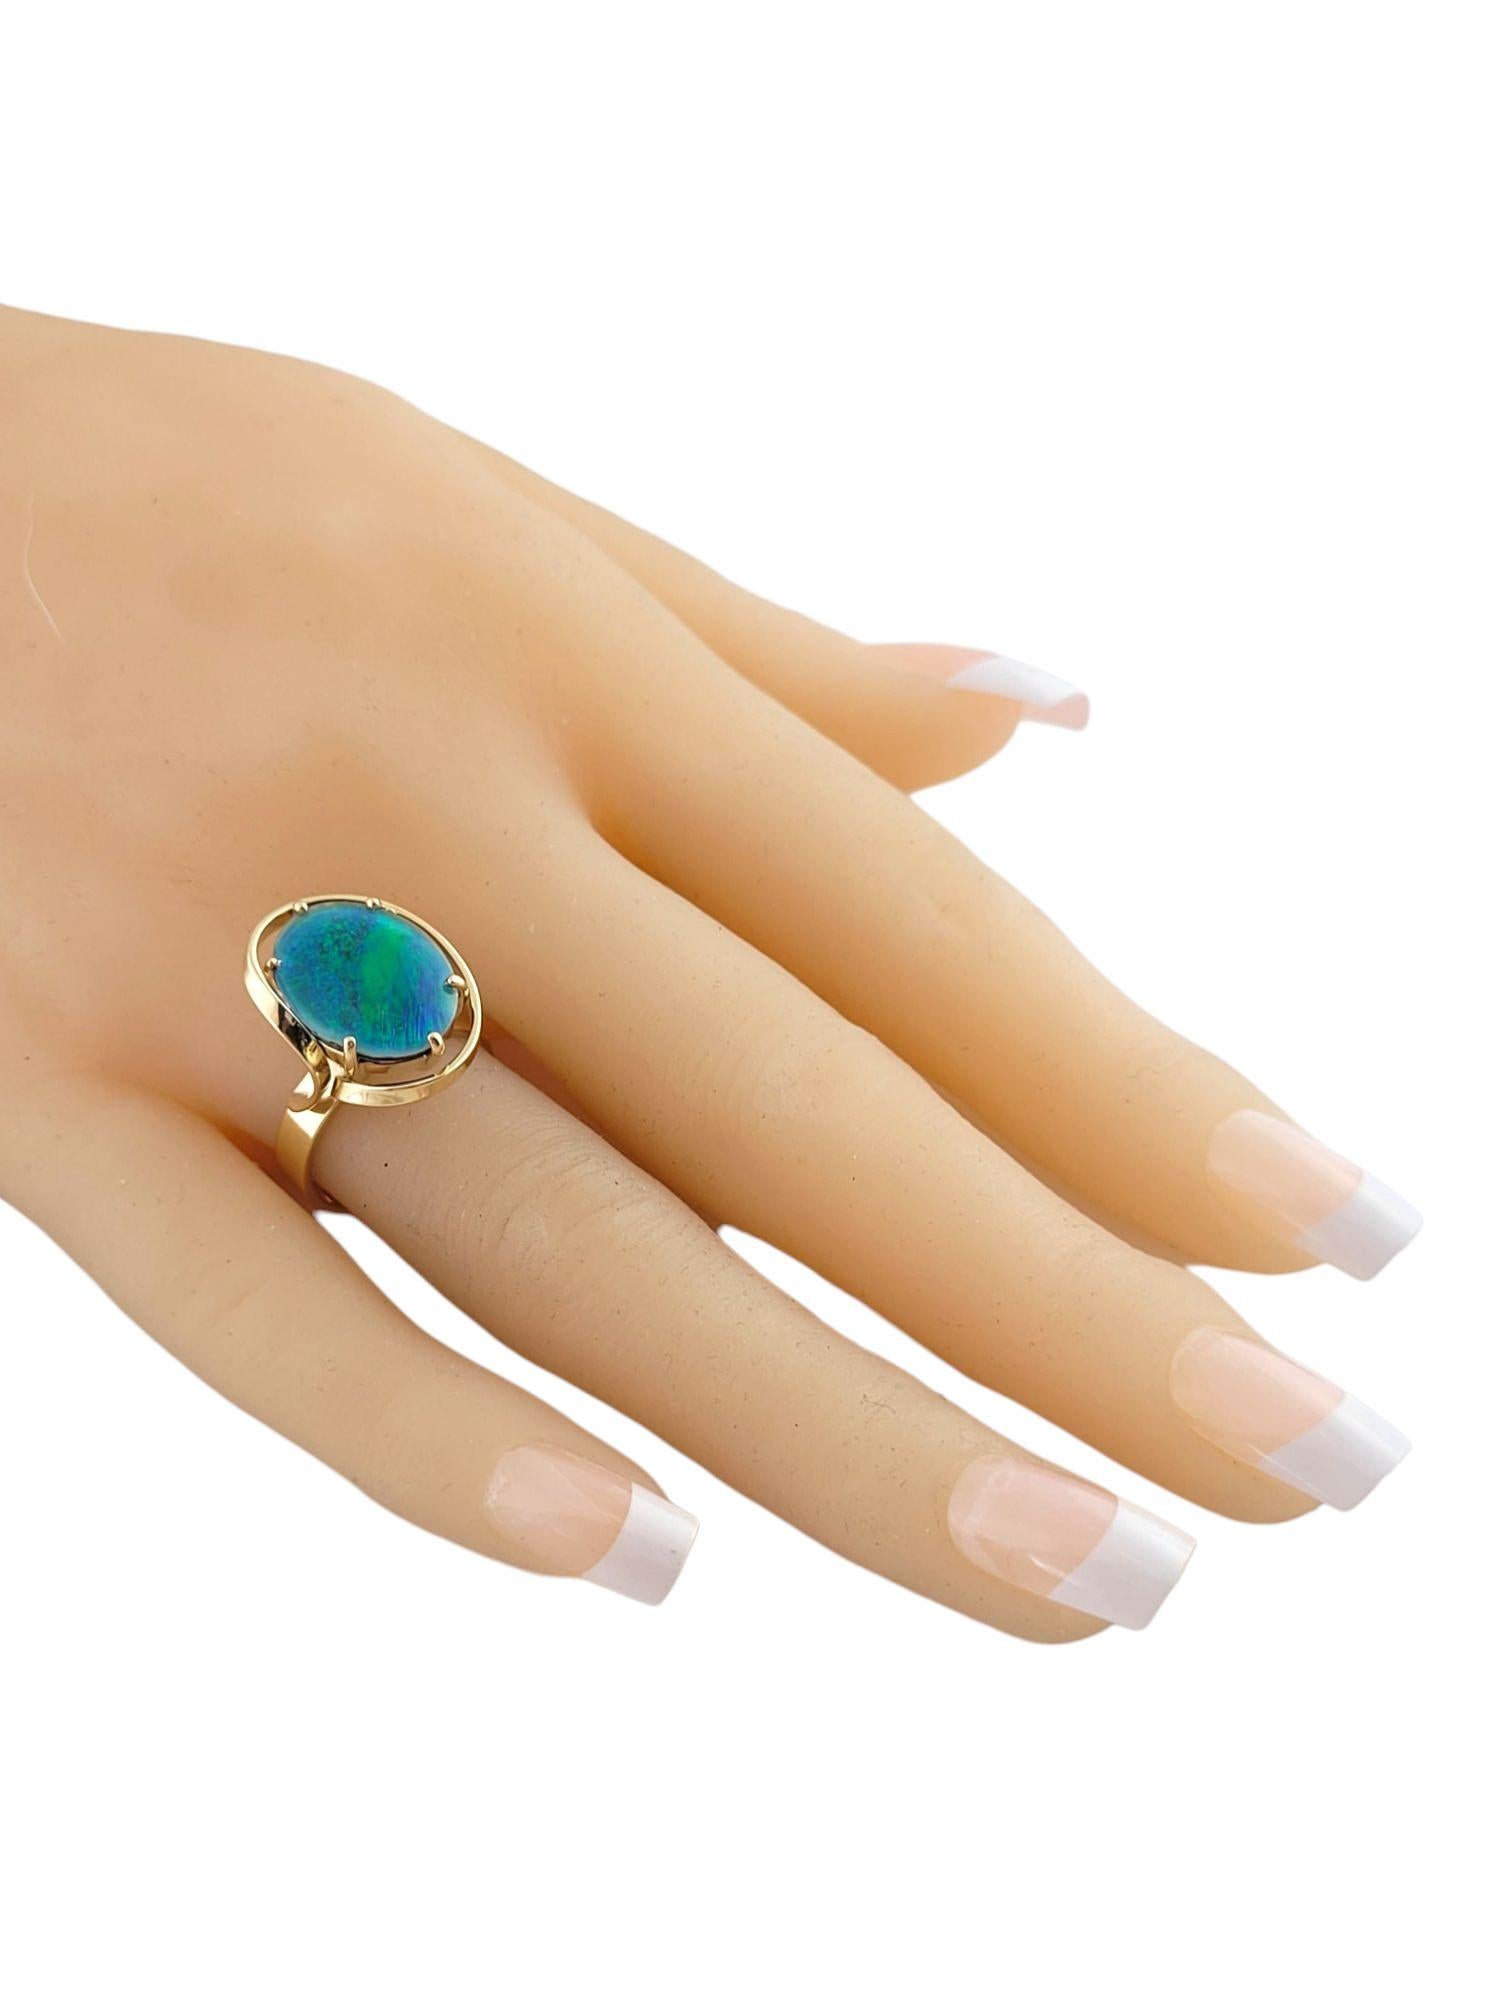 9K Yellow Gold Black Opal Ring Size 6.25-6.5 #14772 For Sale 3